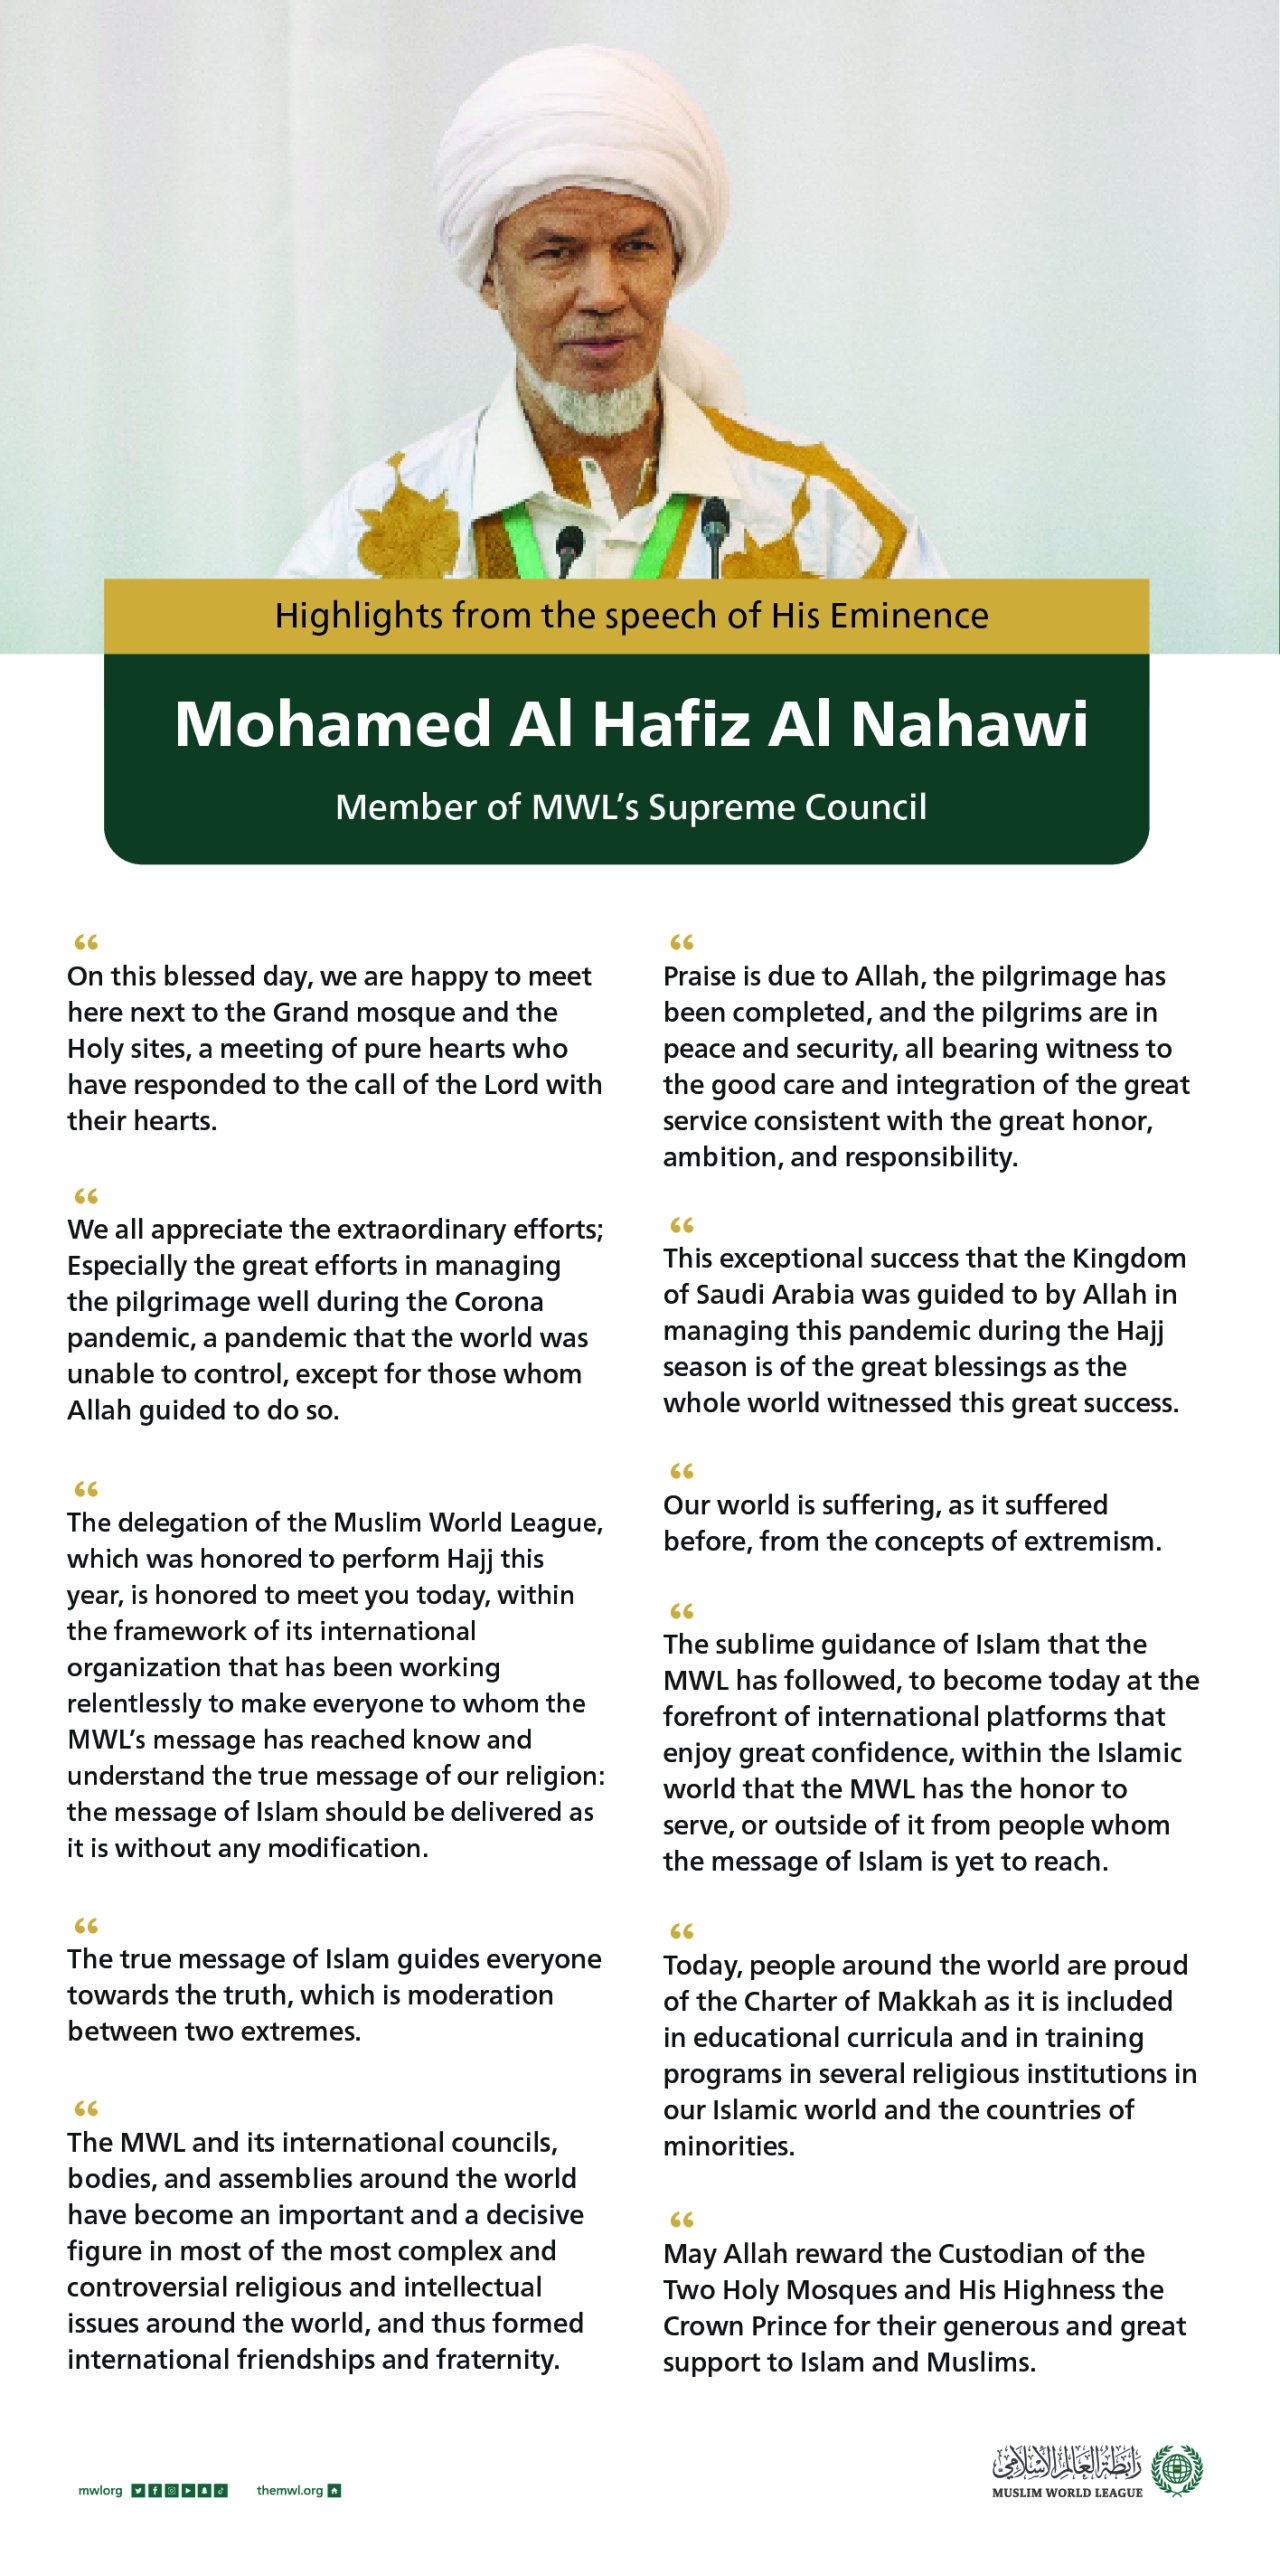 On behalf of the MWL, His Eminence Mohamed Al Hafiz Al Nahawi, President of the African Scholars Forum and member of the MWL Supreme Council, government officials and Islamic dignitaries who performed Hajj this year.